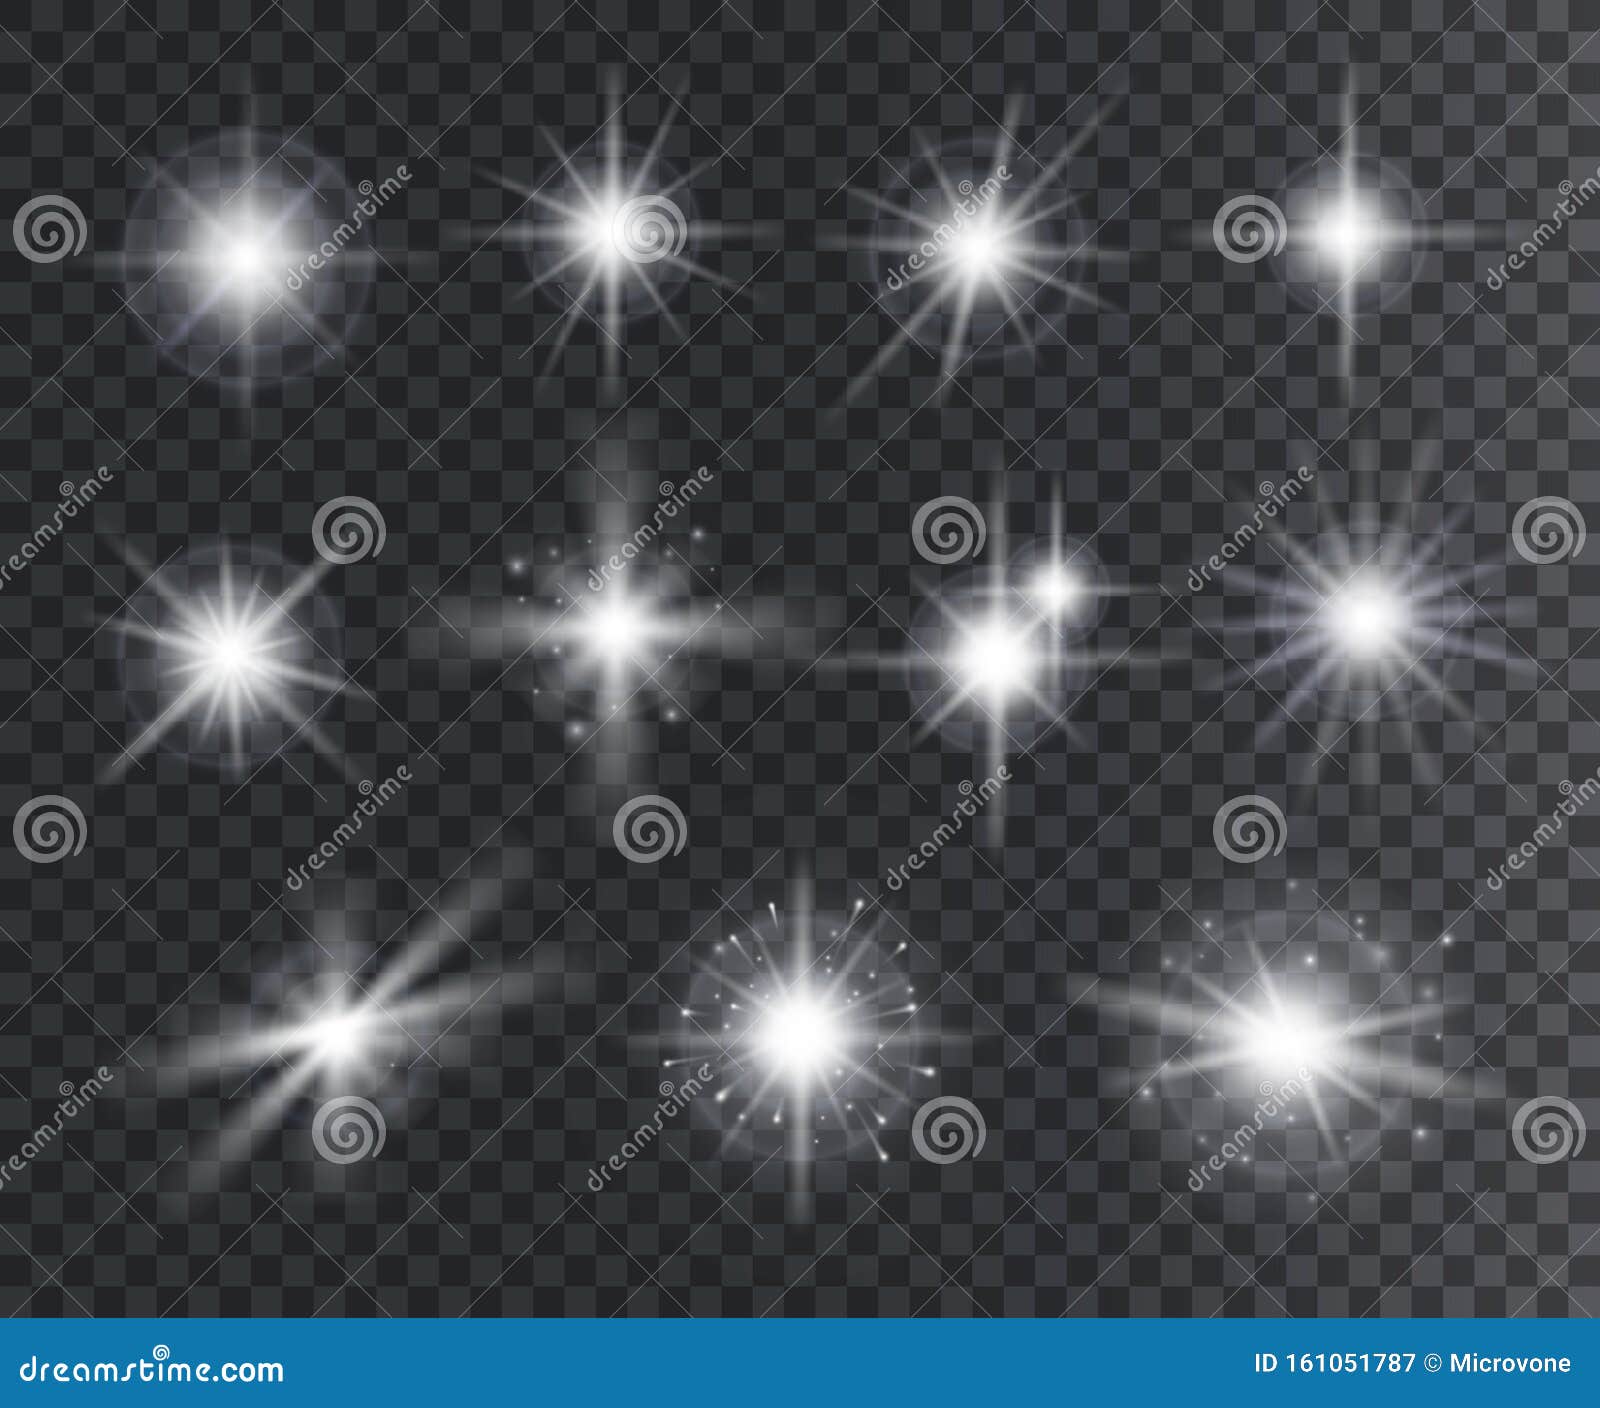 657,102 White Flare Images, Stock Photos, 3D objects, & Vectors